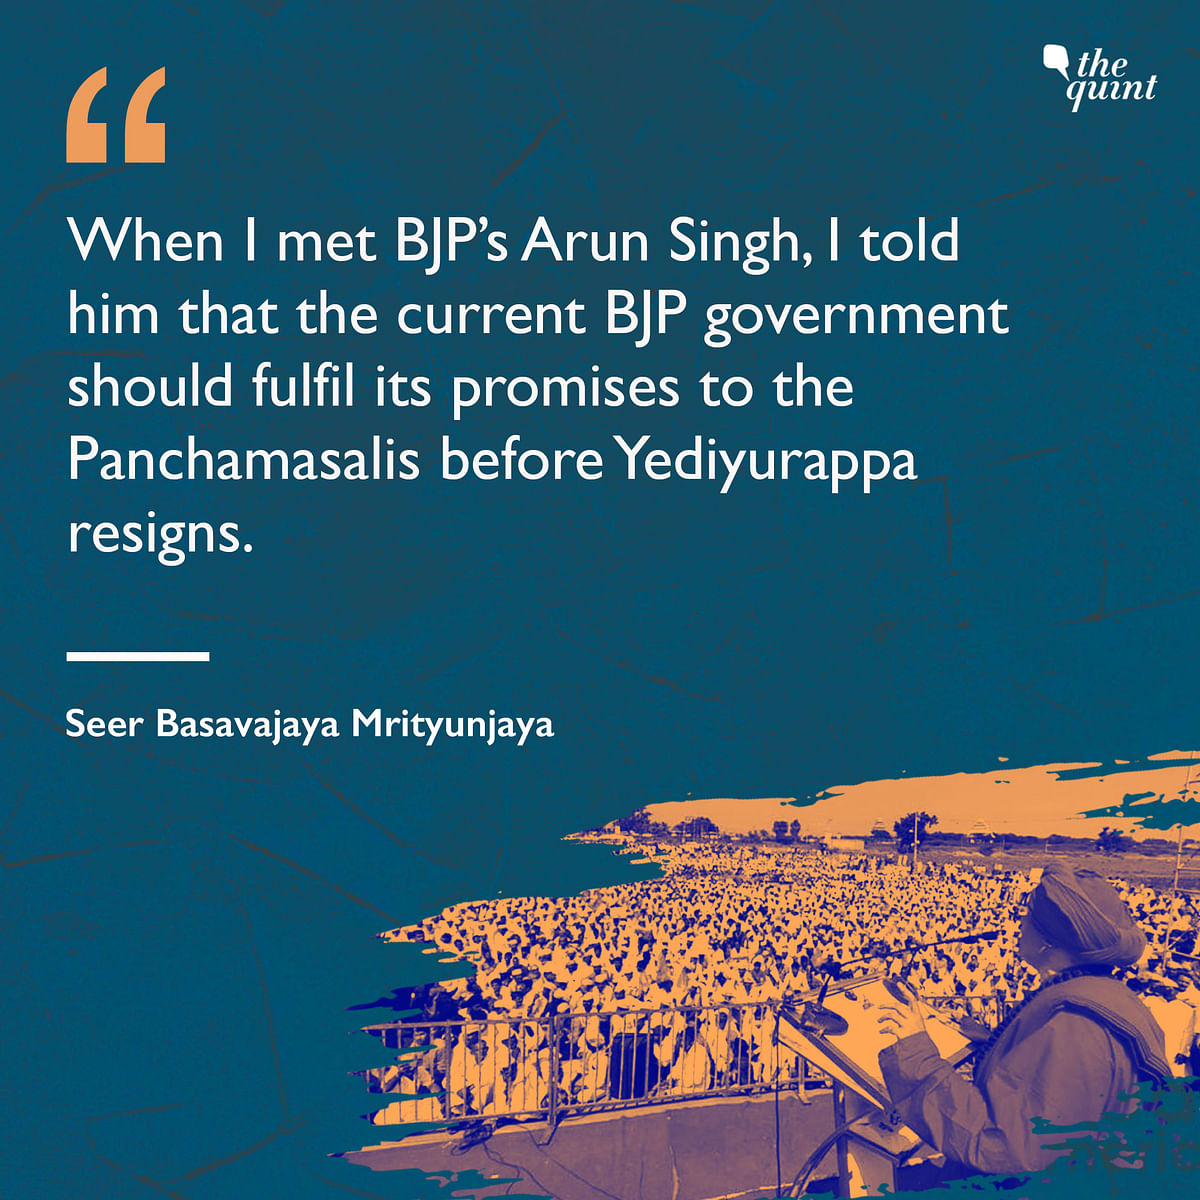 Basavajaya Mrityunjaya Swami has demanded the BJP to find a  Panchamasali replacement for the Chief Minister.